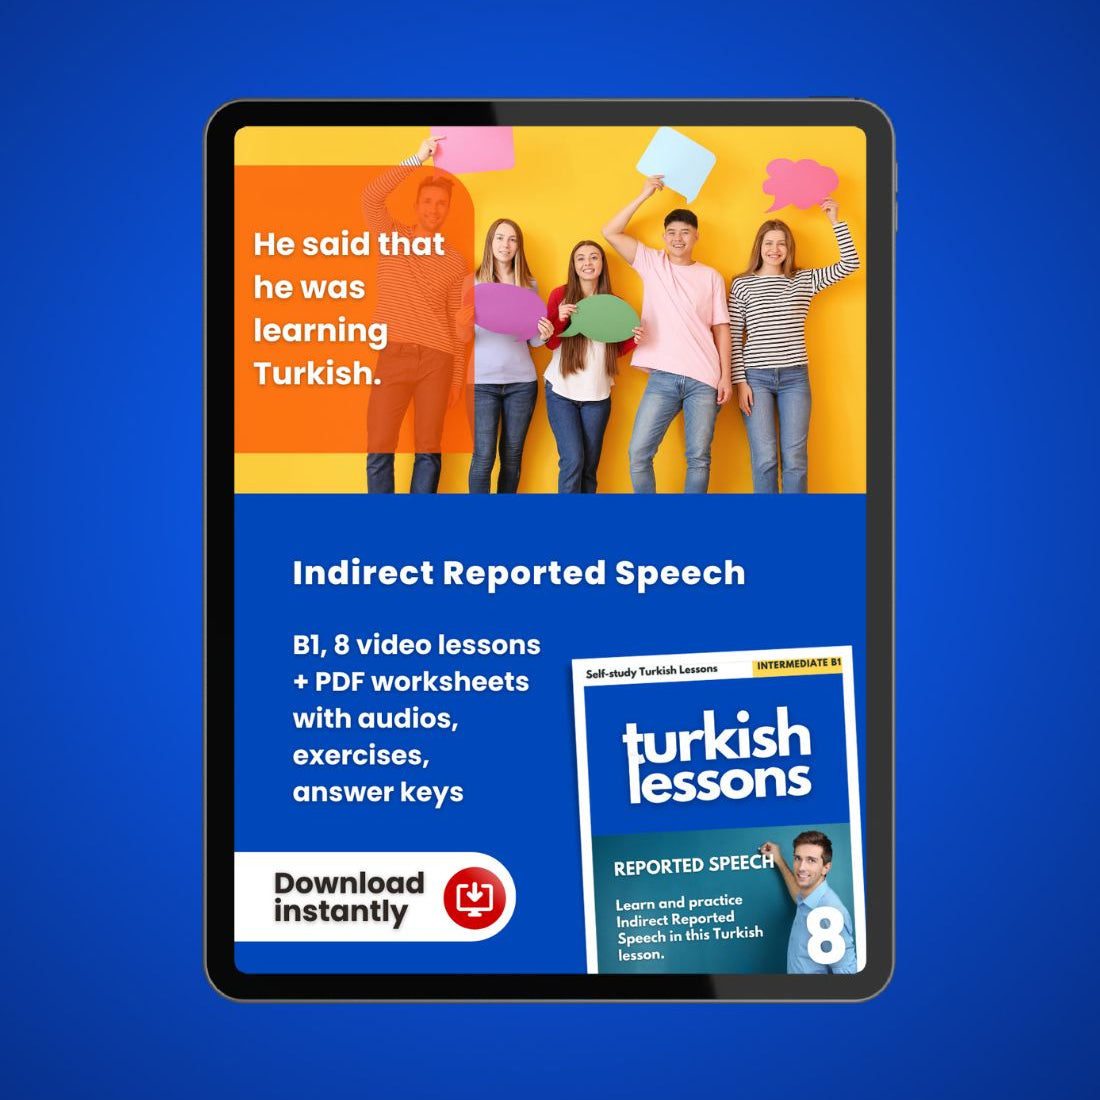 indirect reported speech in turkish language